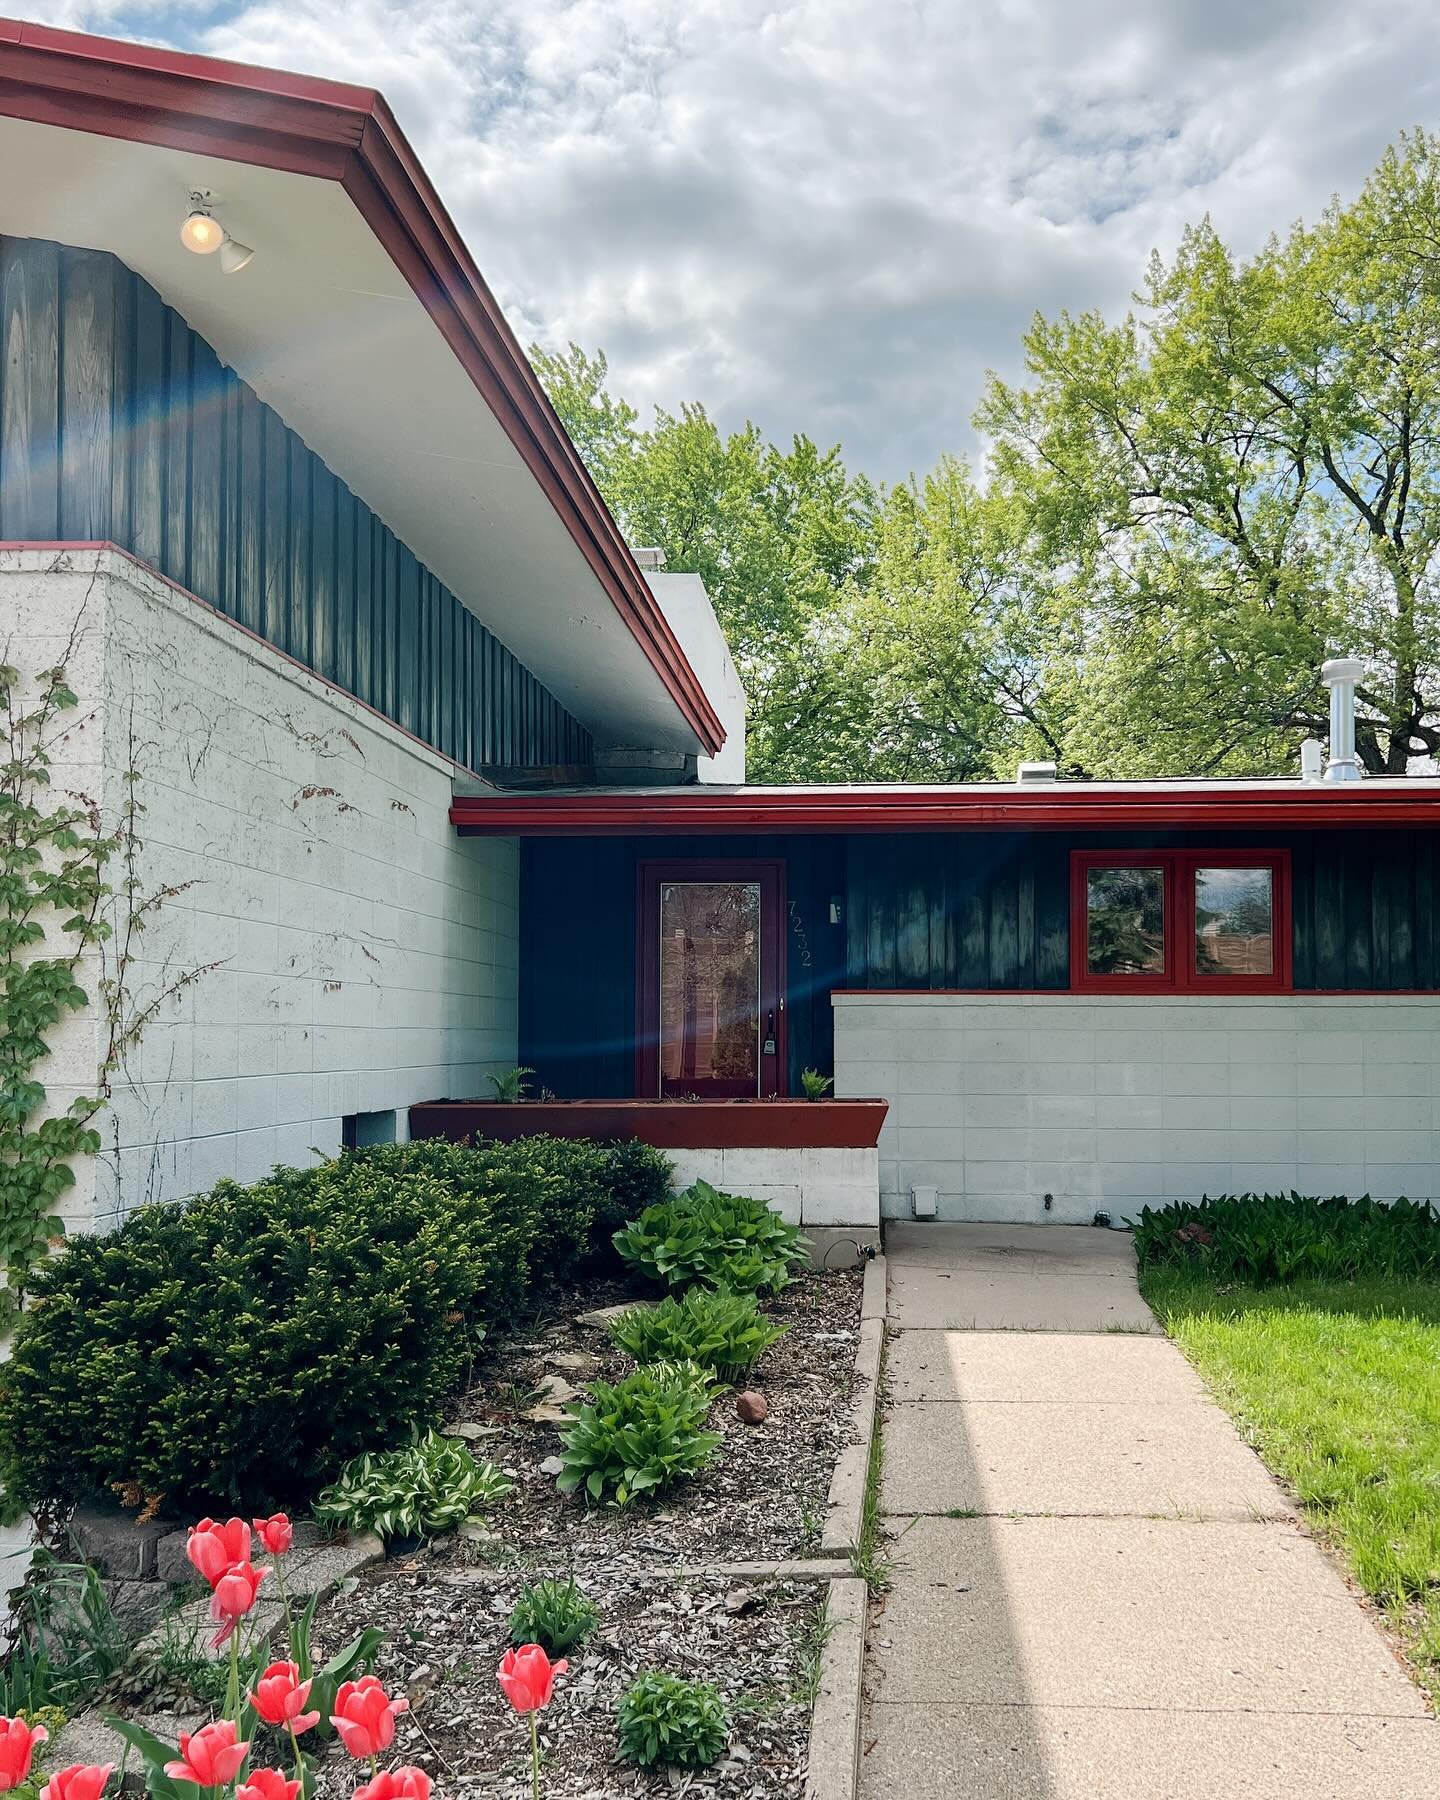 I loved all the original details in this 1958 Mid-Century Modern home in Richfield, Minnesota. This Graffunder-Nagle designed MCM is as good of a time capsule as it gets!

Interested in finding your own home to love? Fill out my &lsquo;buy with me&rs